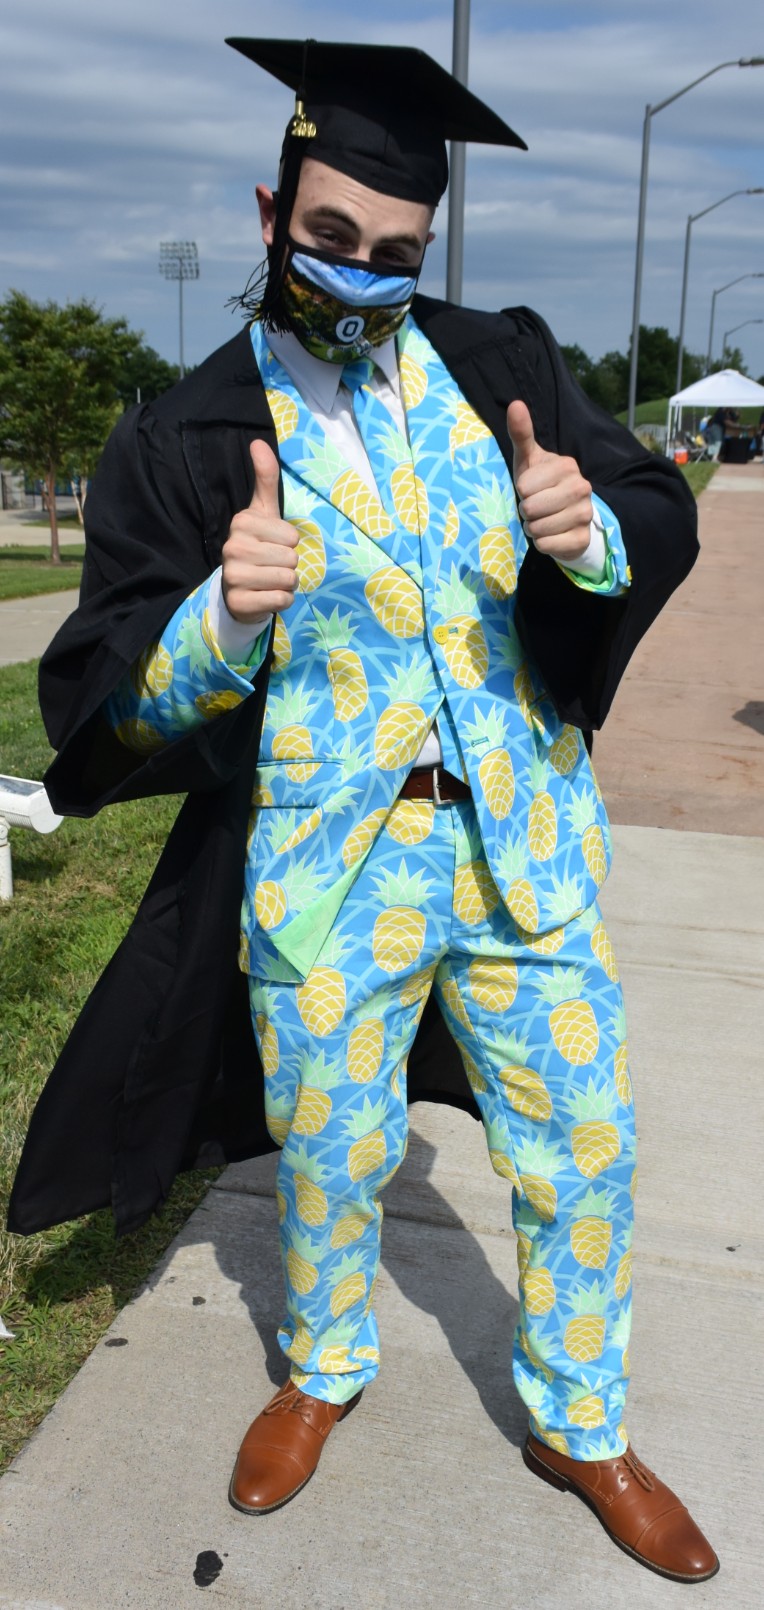 Student in Pineapple suit